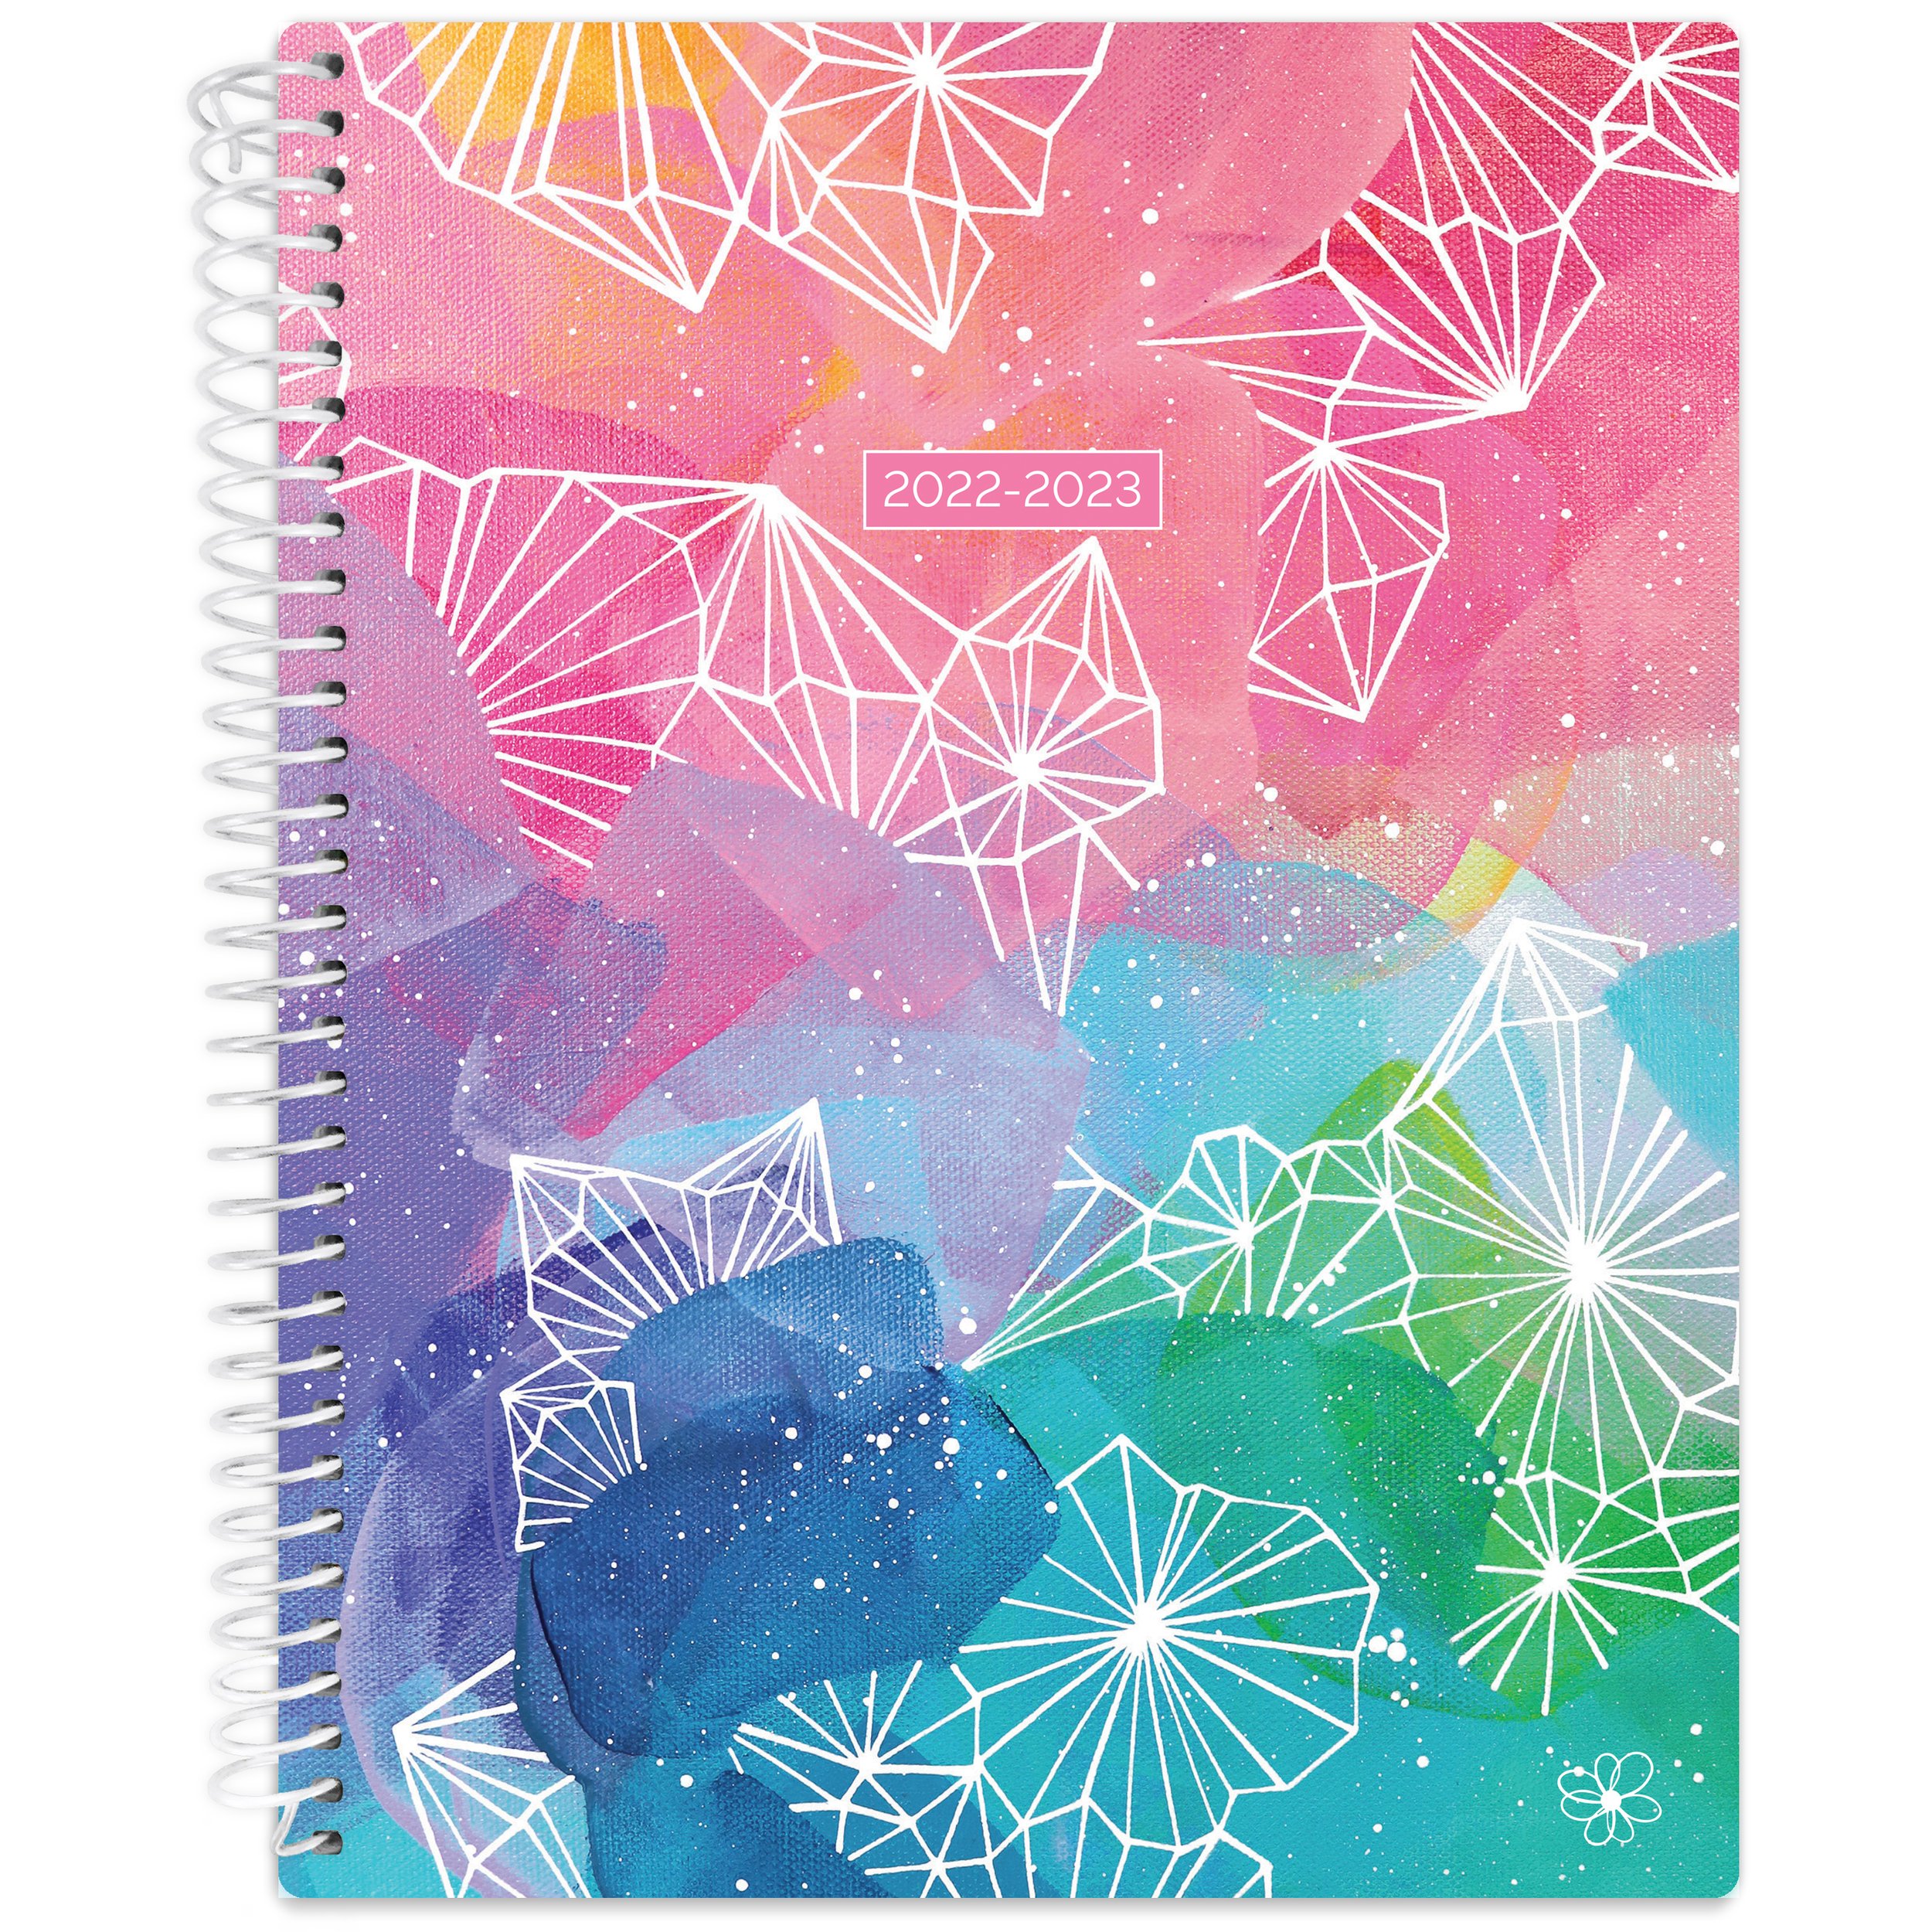 July 2021 - July 2022 Daisy by bloom daily planners 2021-2022 Academic Year Student Day Planner Wildflowers - Elementary Through Middle School Calendar Agenda Book 7” x 9 